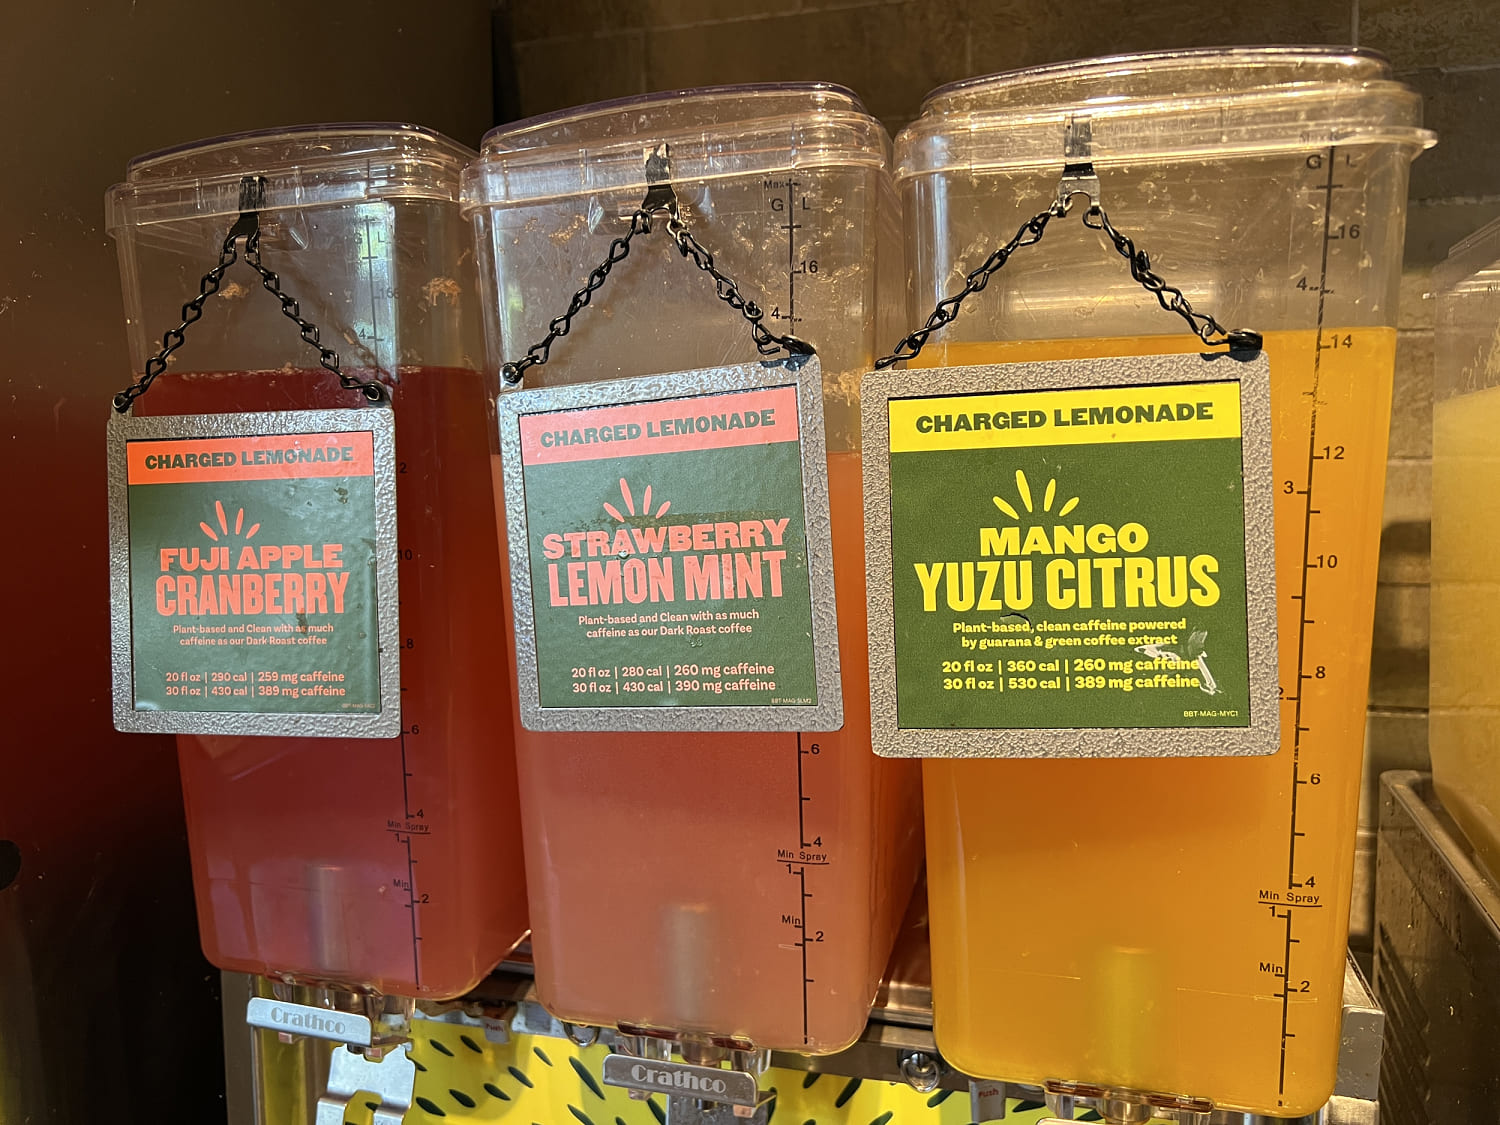 Panera says it is phasing out its controversial Charged Lemonade nationwide